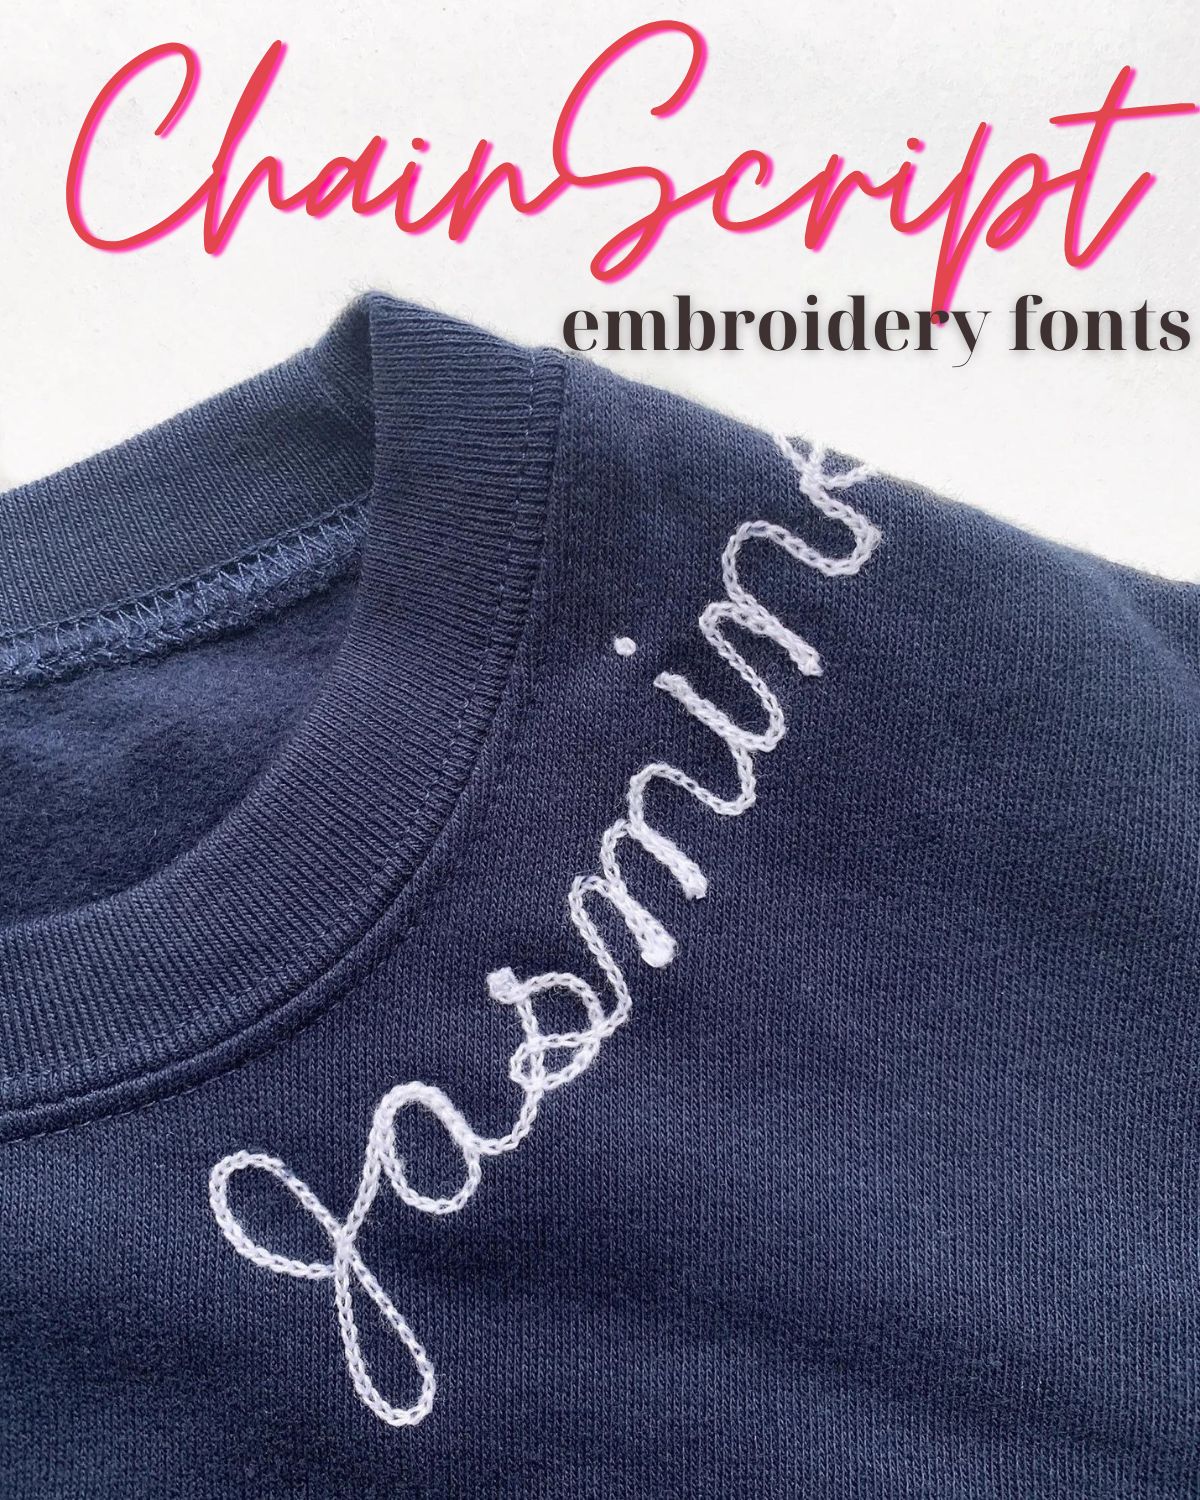 A sweatshirt with a script embroidery font